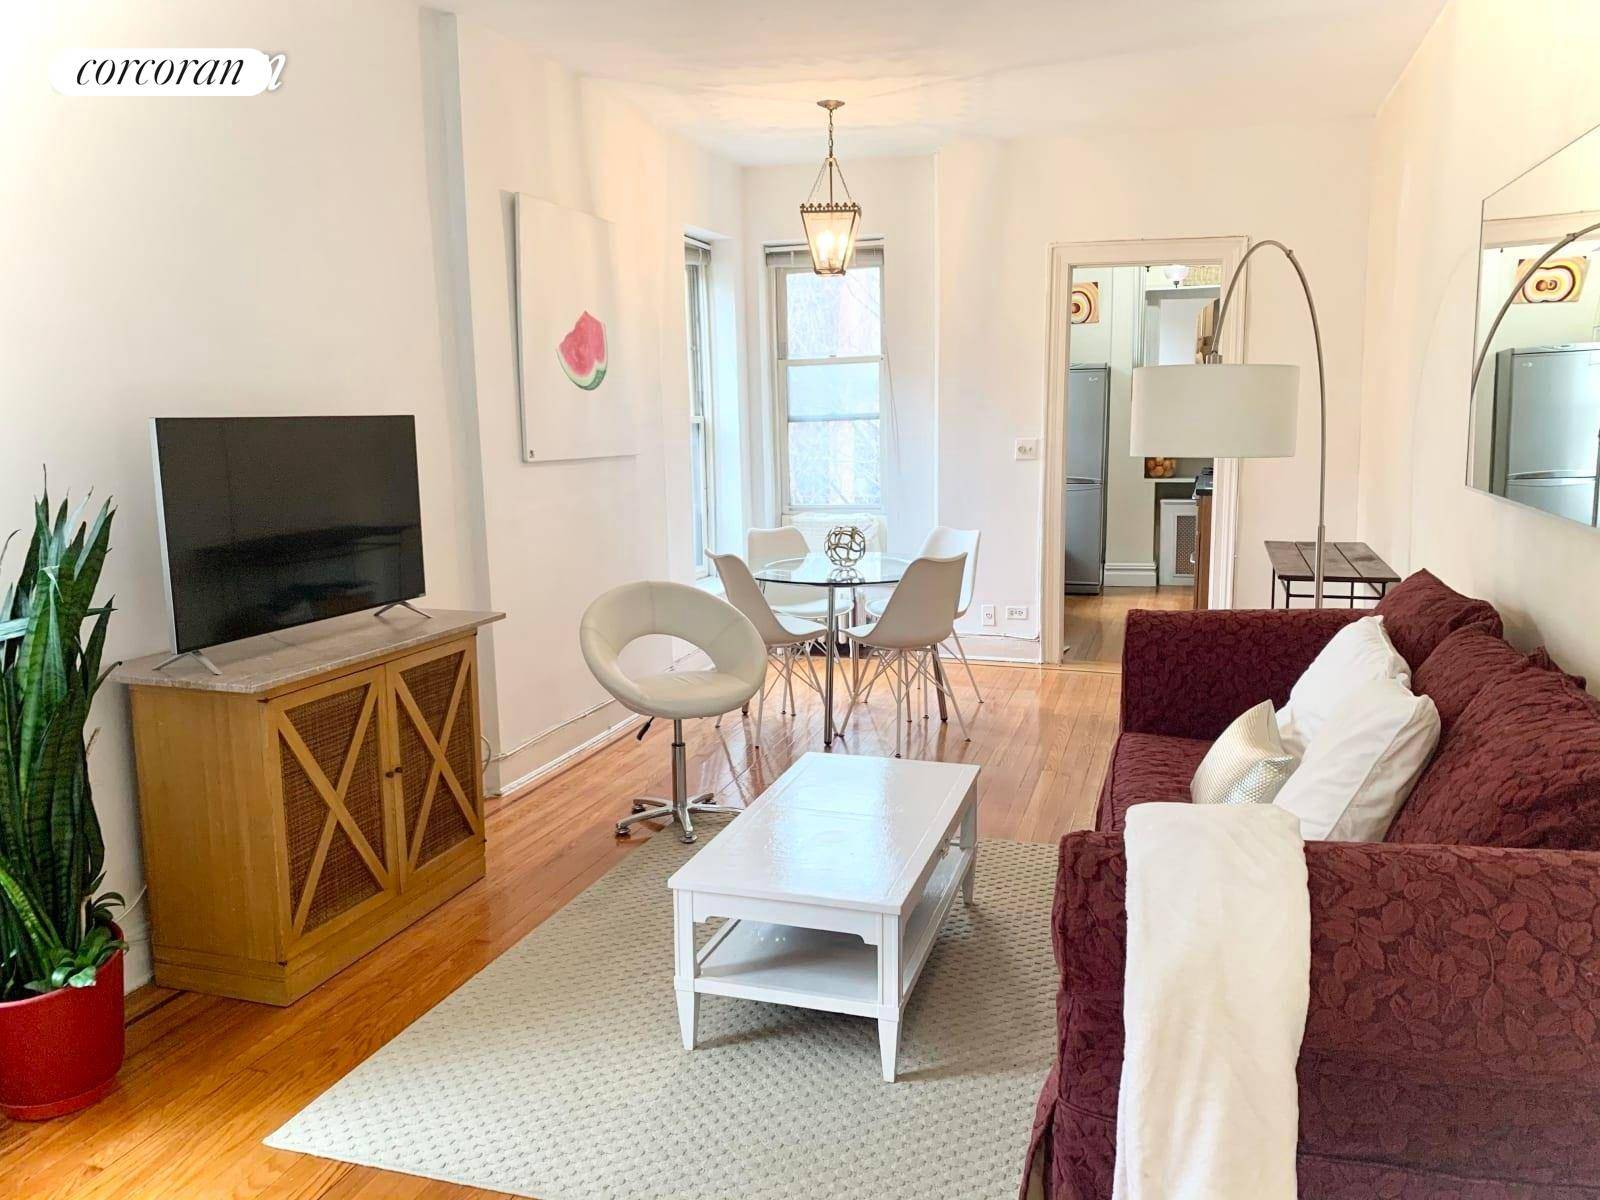 29 Willow Street is Brooklyn Height's leading luxury furnished rental location !